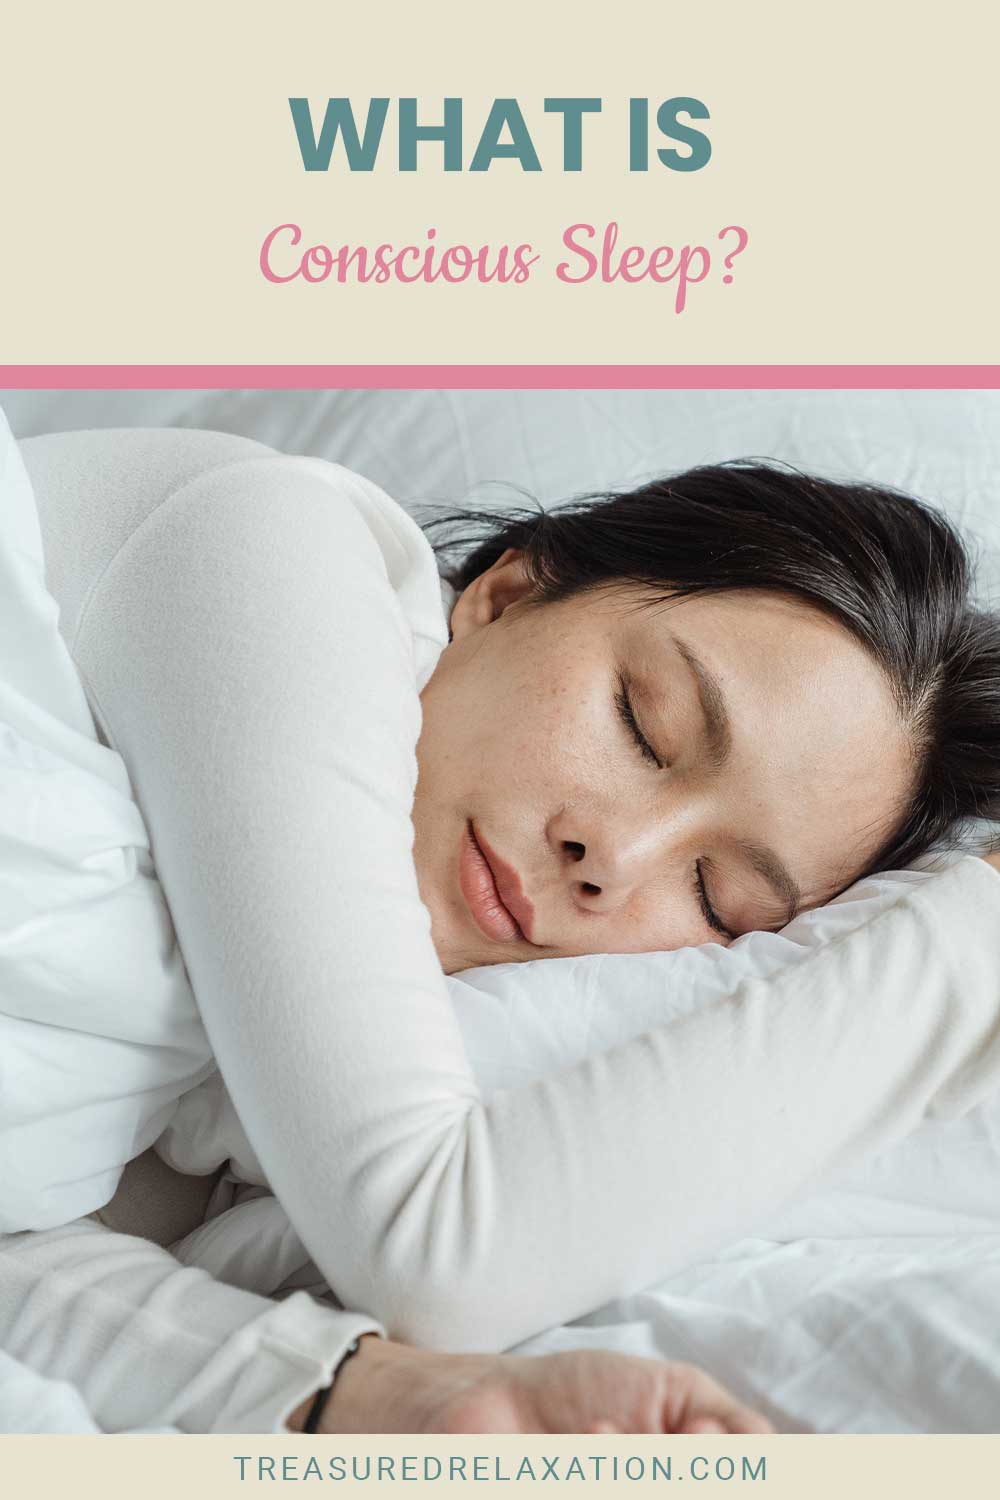 Woman in white shirt sleeping - What is Conscious Sleep?